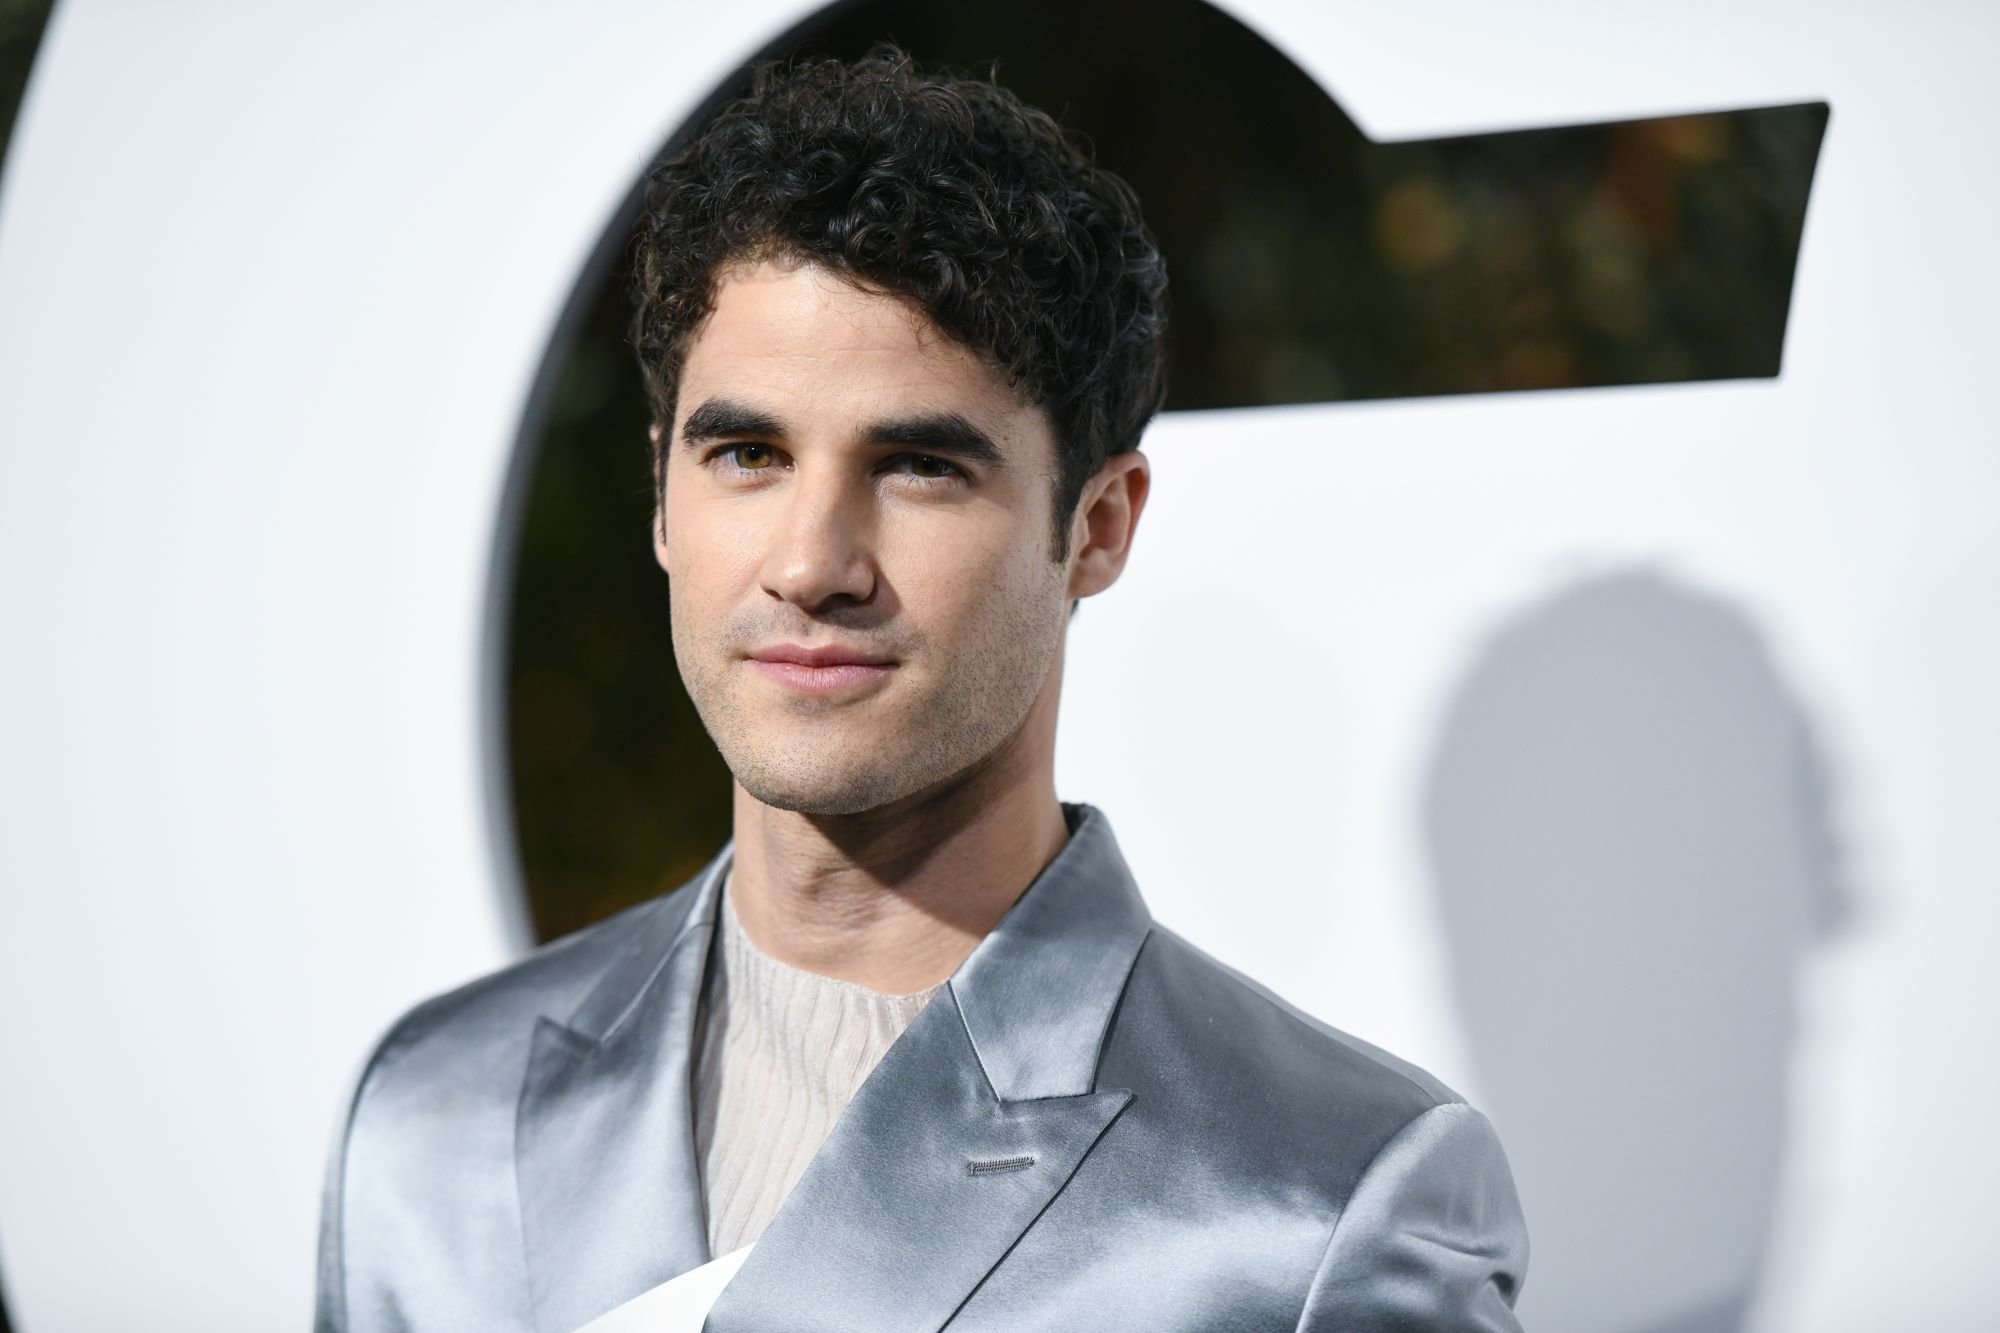 'Glee' actor Darren Criss wears a silver suit over a white shirt.